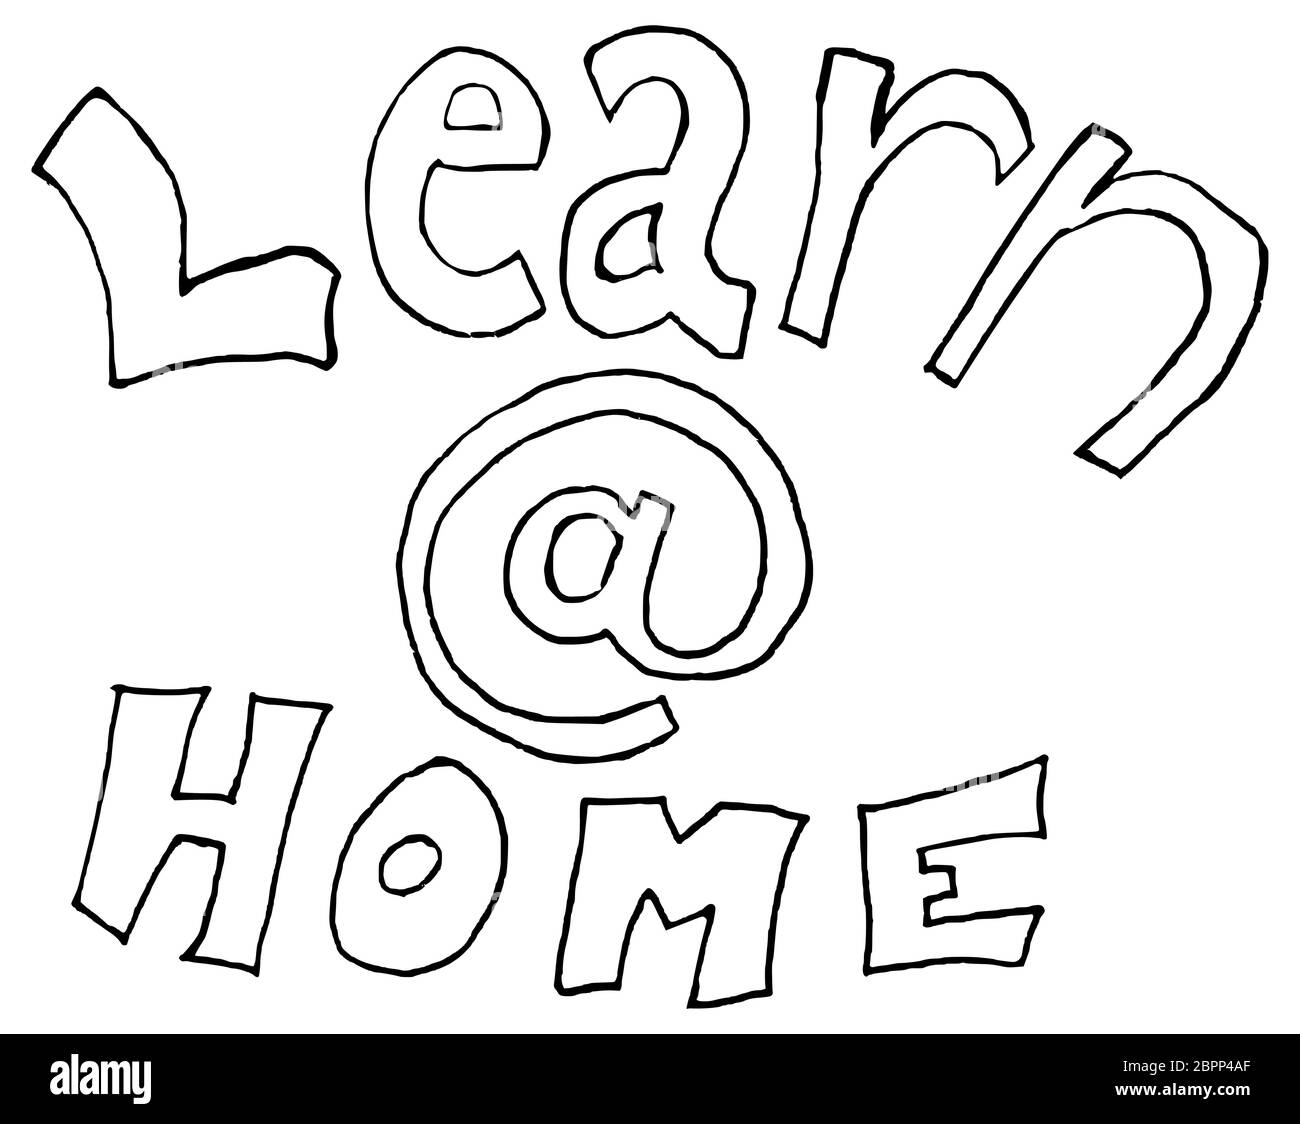 Free hand drawning of learn at (@) home concept for isolation made from COVID-19 coronavirus Stock Photo